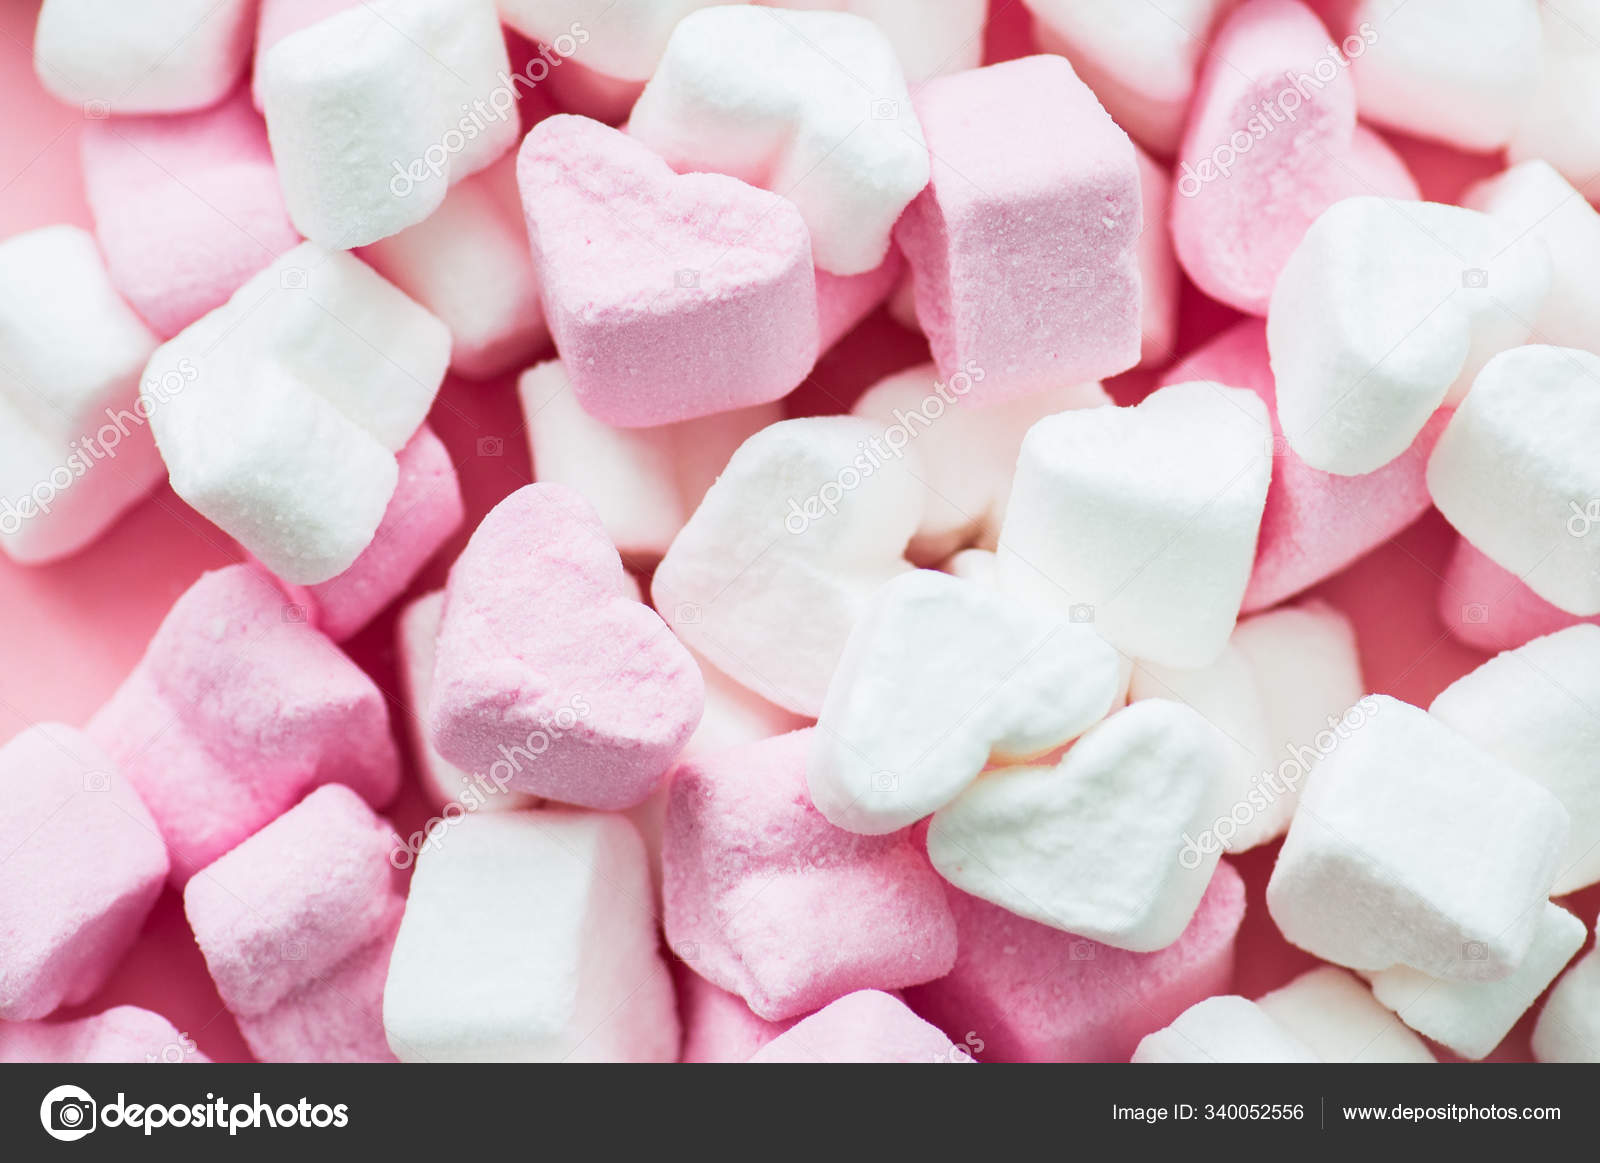 Pink fluffy heart shaped marshmallows candy background. Stock